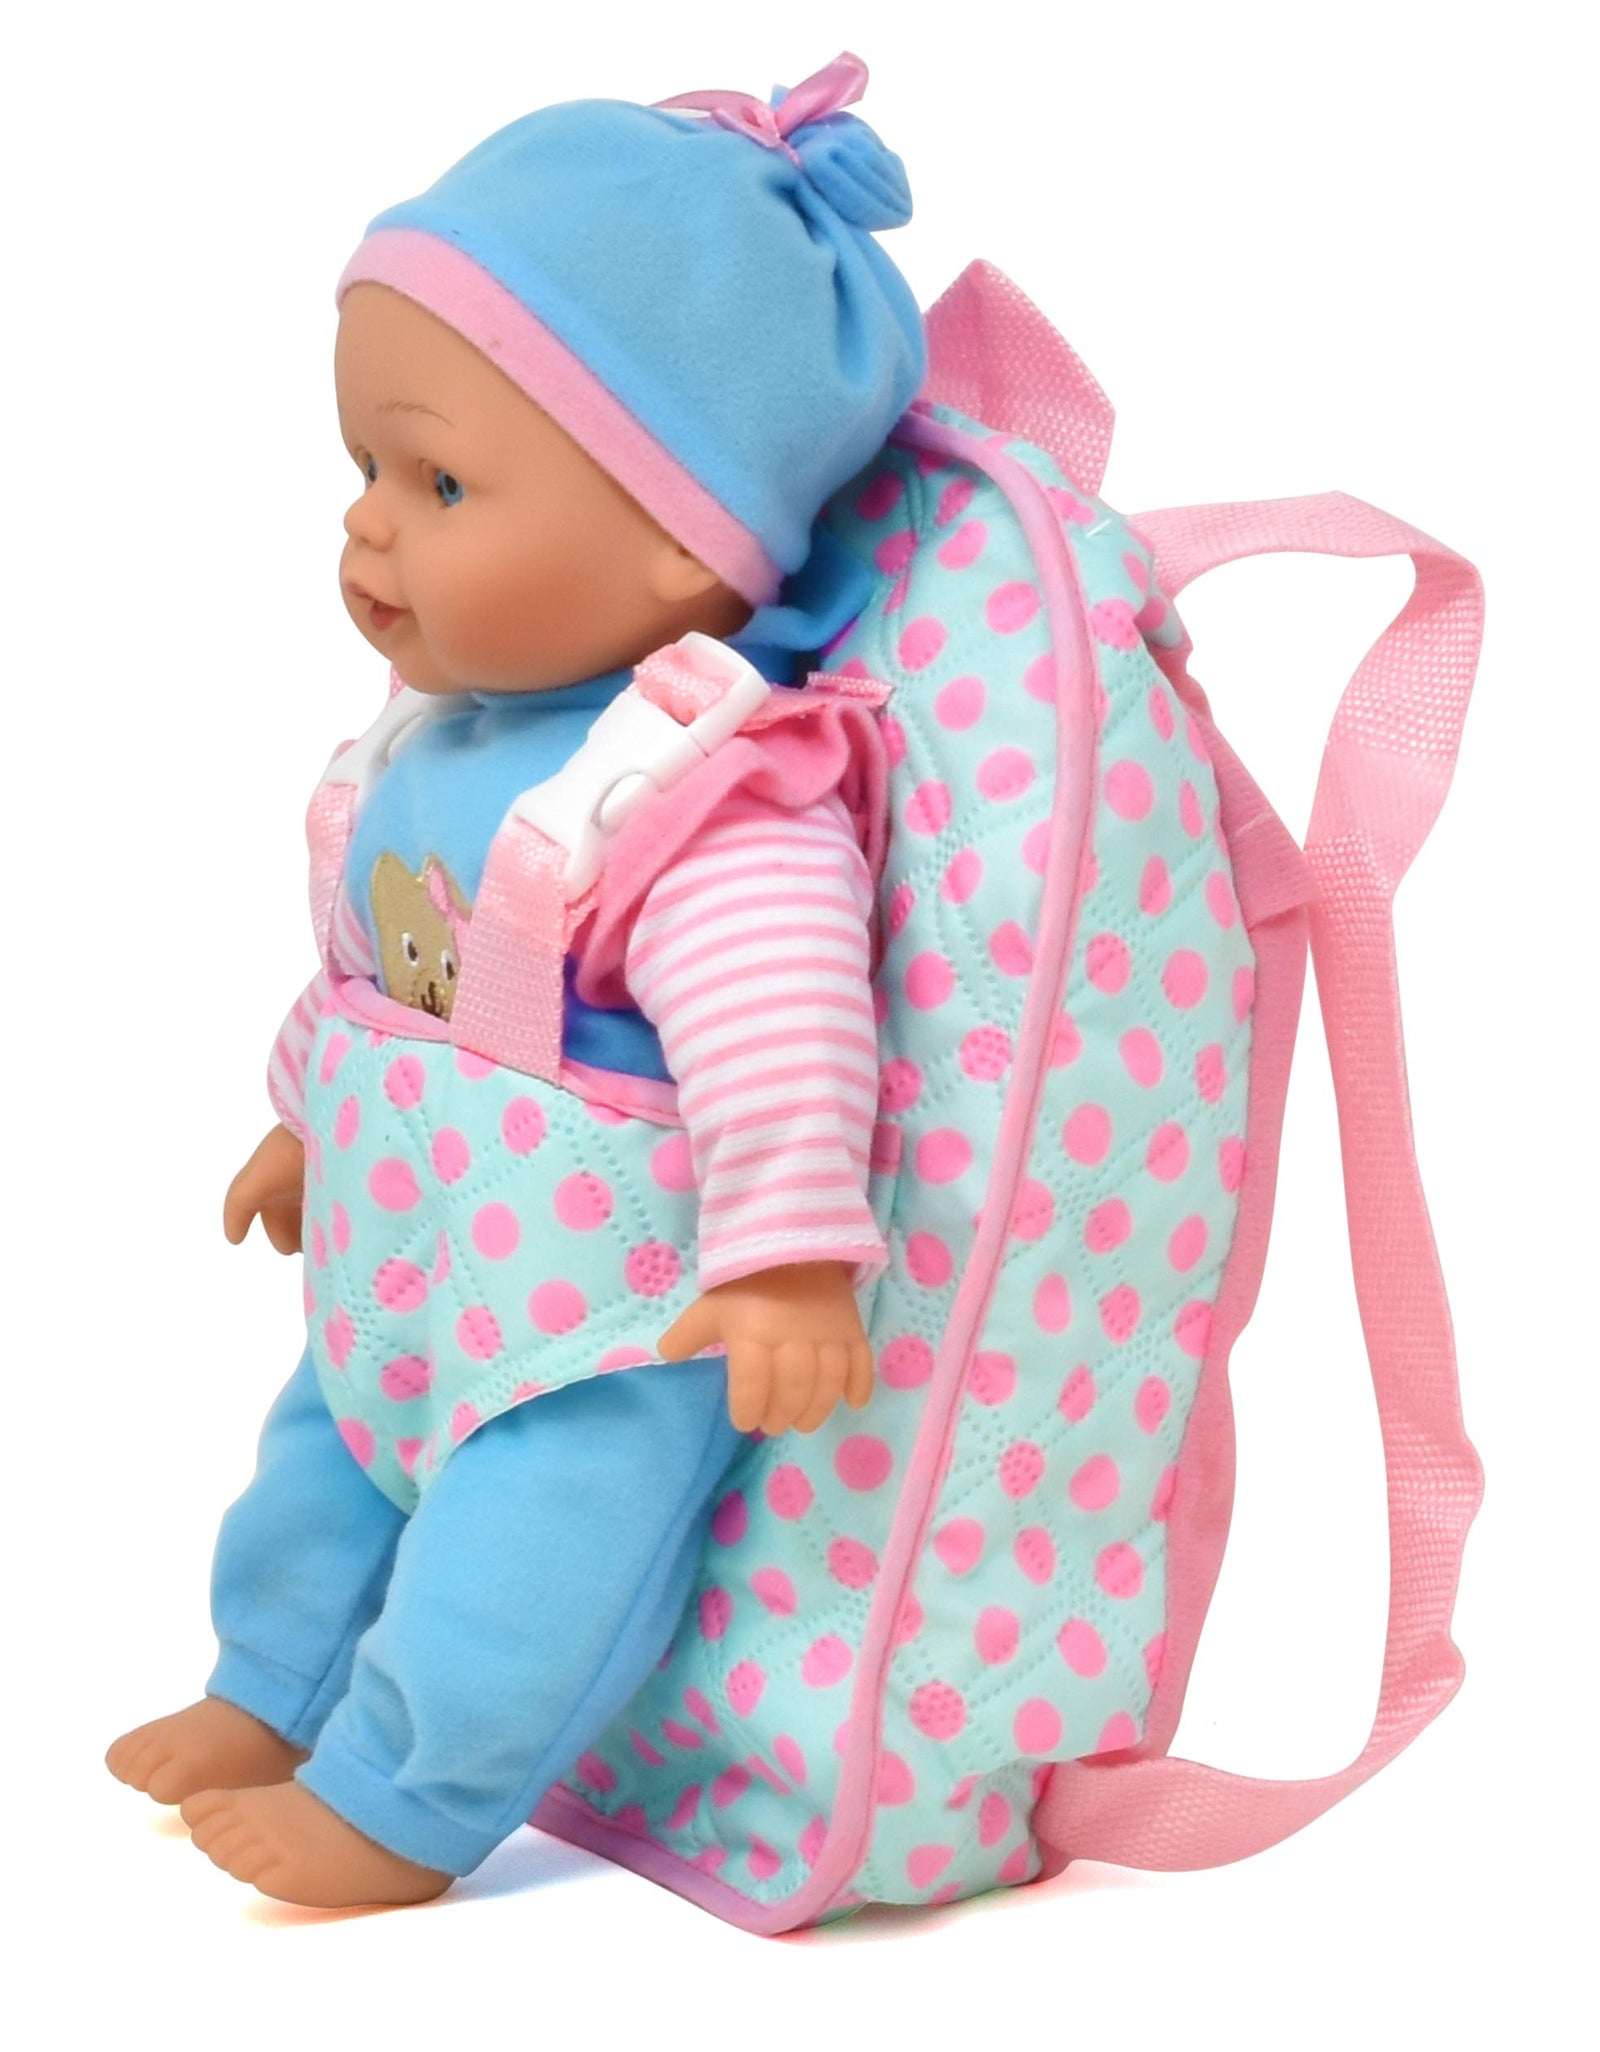 13" Soft Baby Doll with Take Along Pink Doll Backpack Carrier, Briefcase Pocket Fits Doll Accessories and Clothing